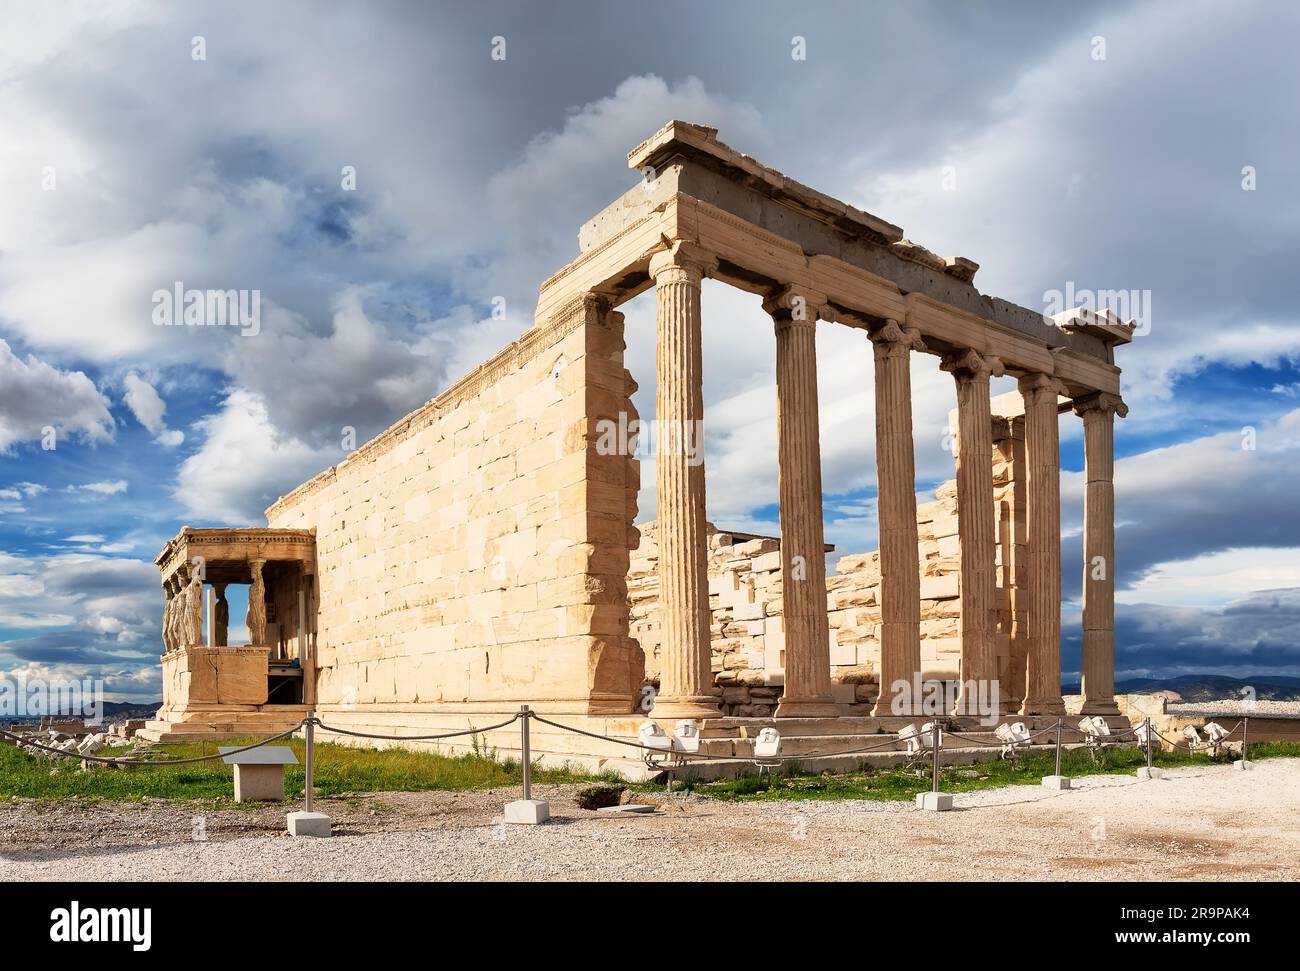 Ancient Erechtheion Greek temple on sunset with Porch of the Caryatids at Acropolis in Athens, Greece. Ruins of the temple of Erechtheion and temple o Stock Photo